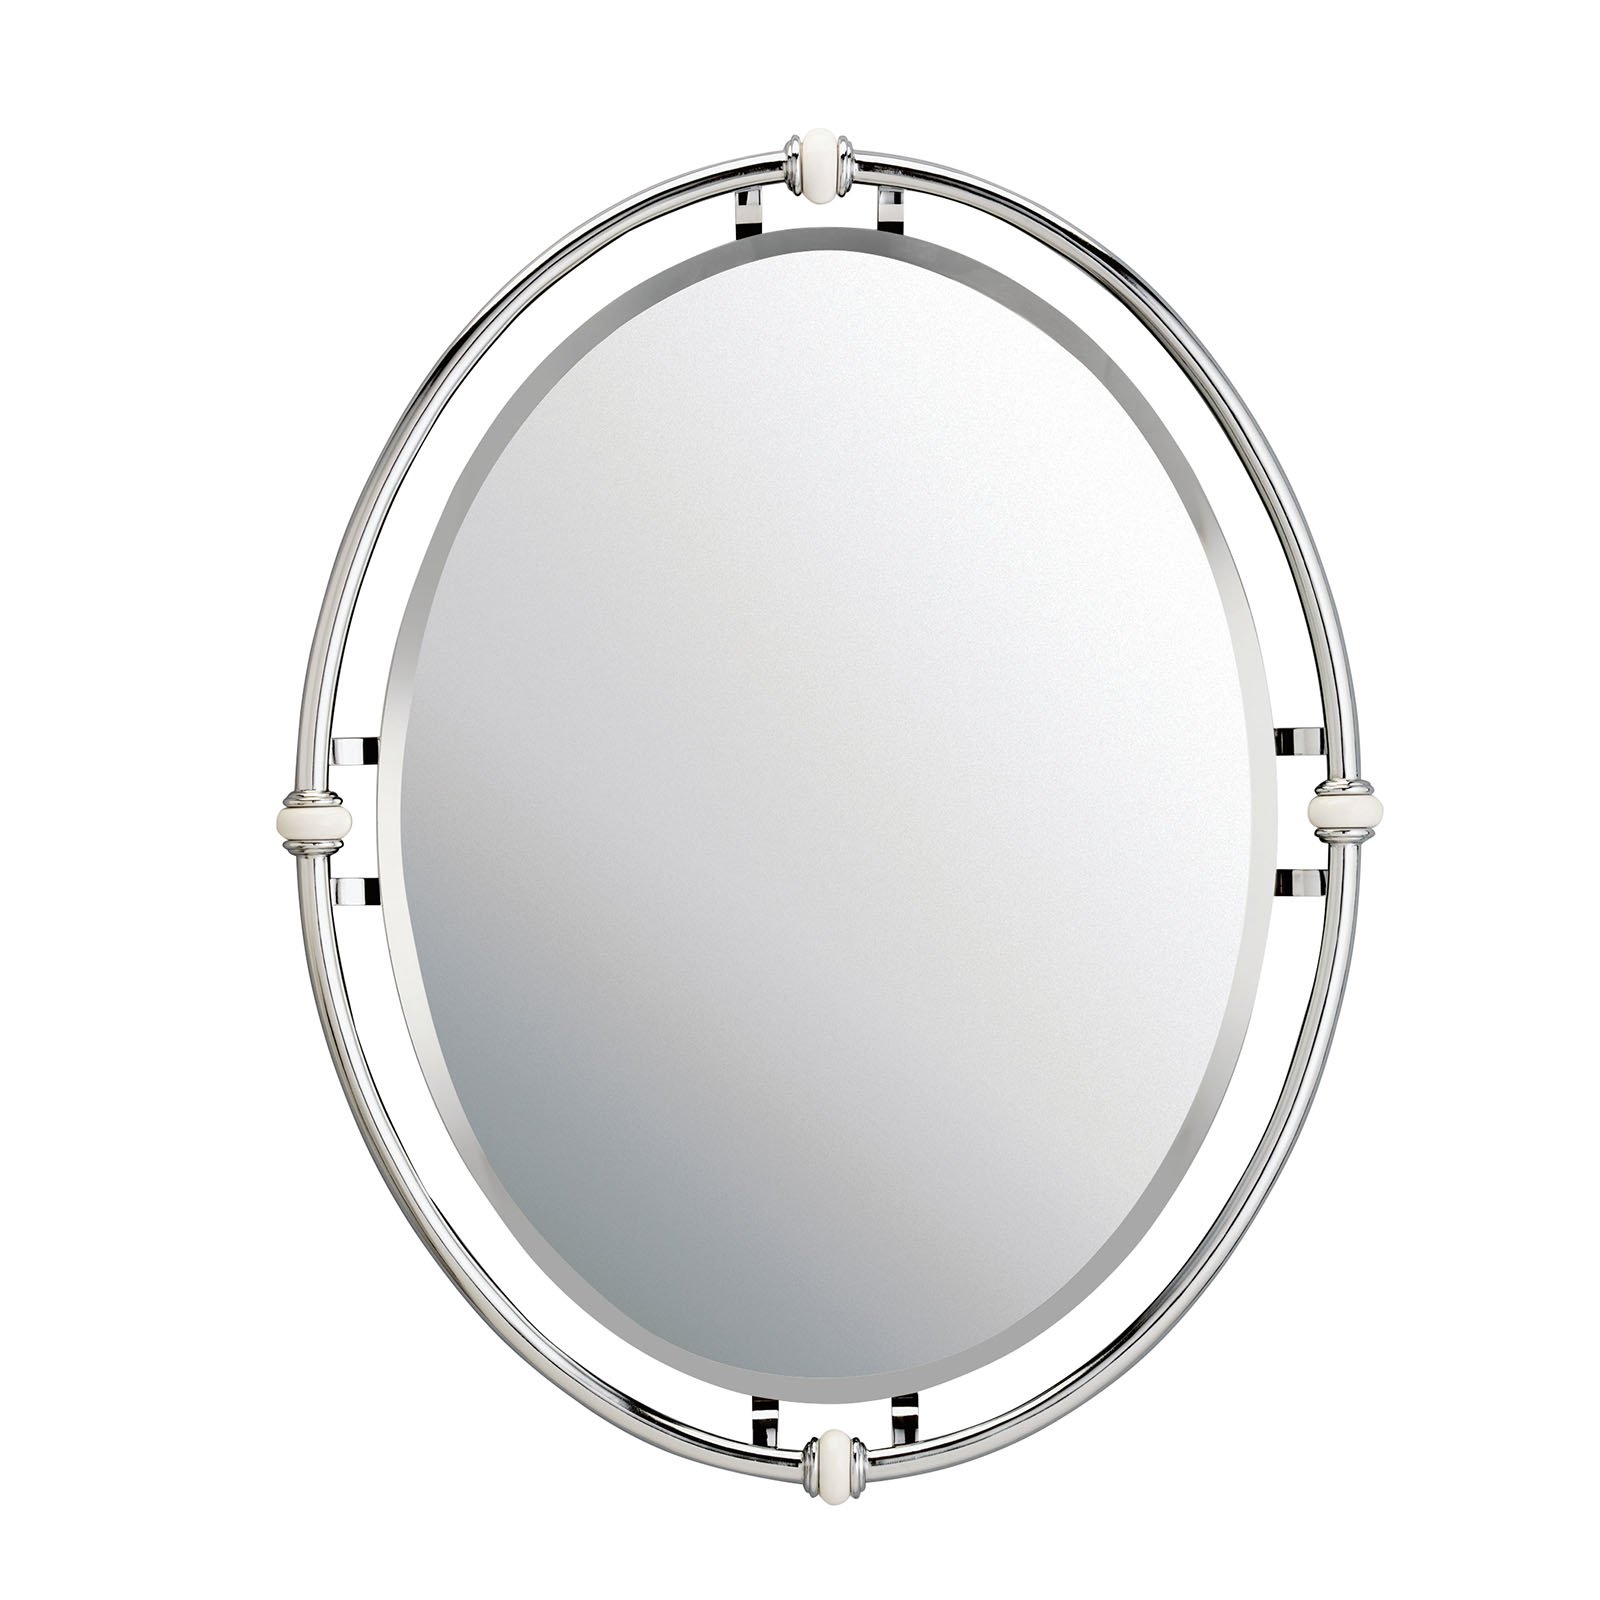 41067CH 783927224697 Featuring clean lines, white porcelain accents and a dazzling Chrome finish, this mirror from the Pocelona(TM) collection is appealing for a vintage-inspired look. With a timeless grace and soft beauty, this fixture is capable of matching any decor.